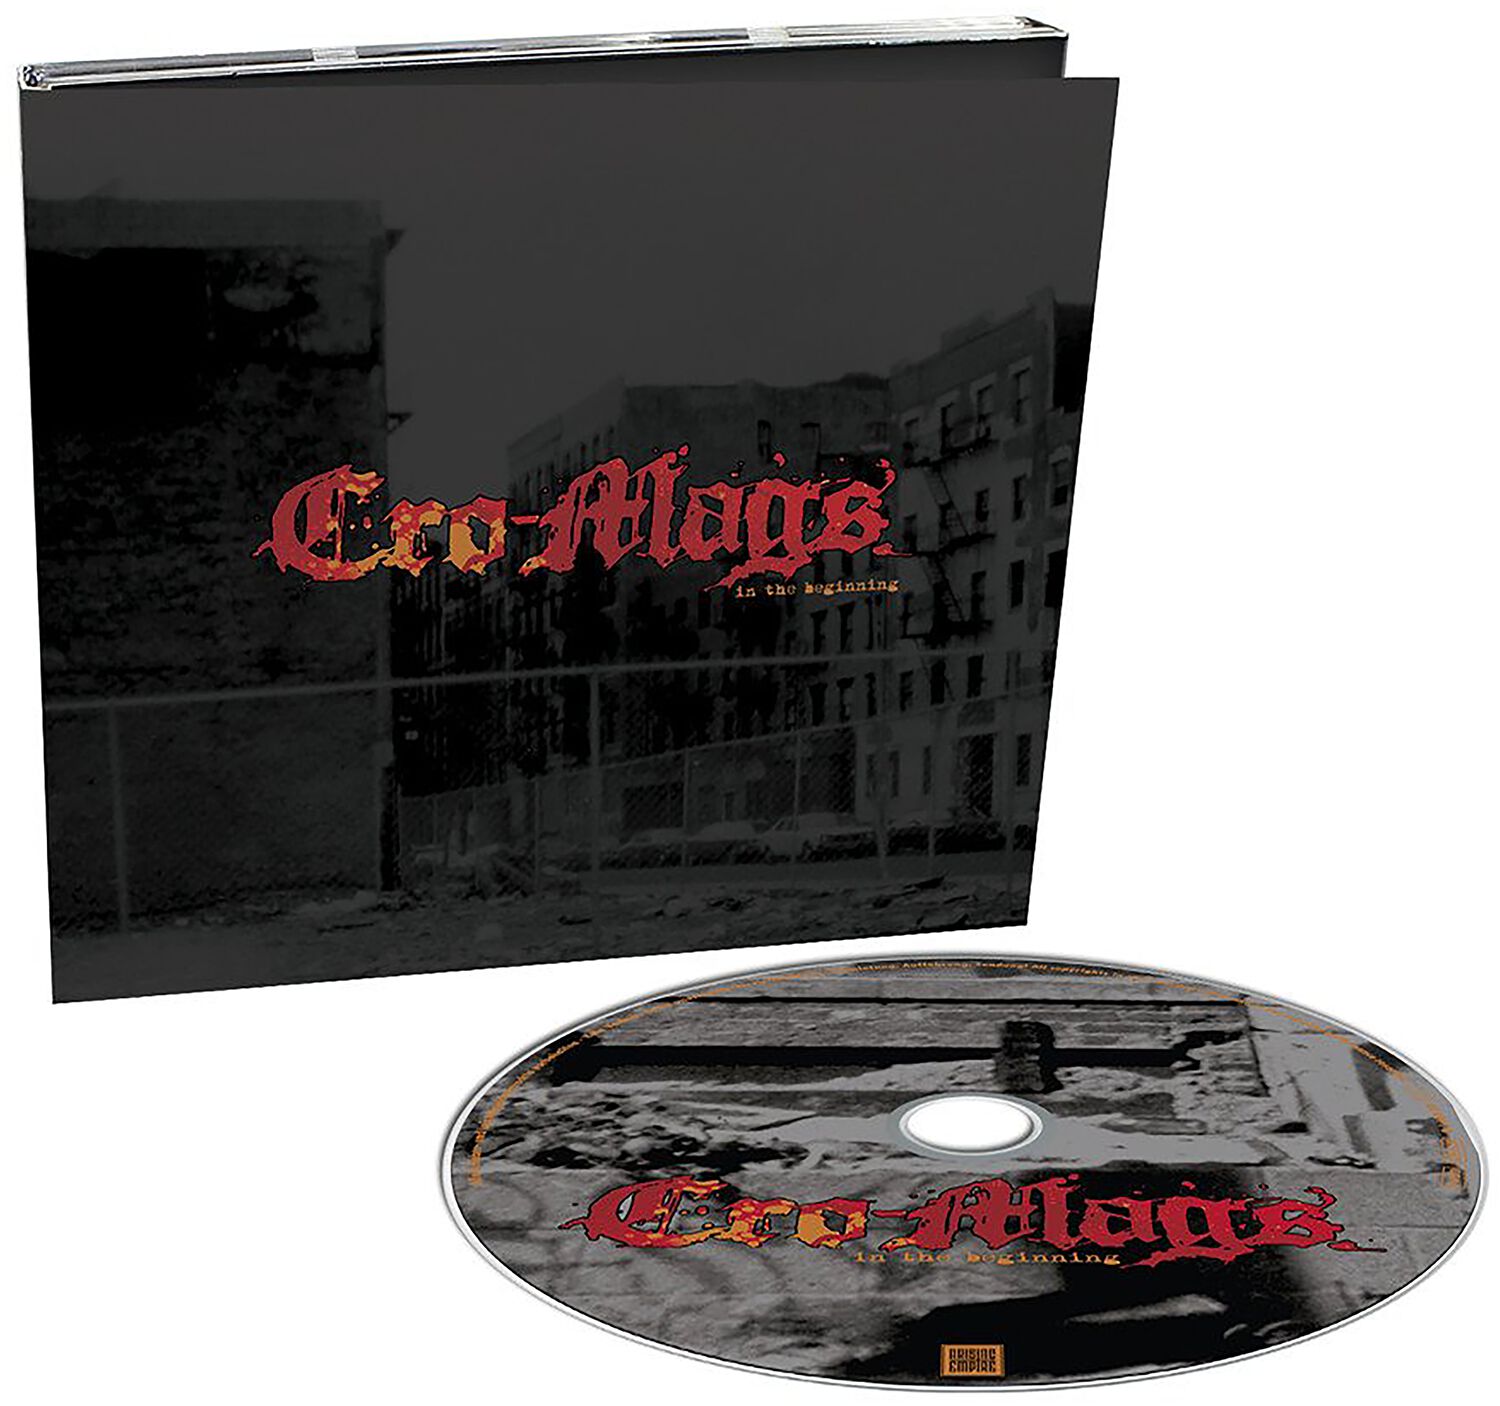 Cro-Mags In the beginning CD multicolor